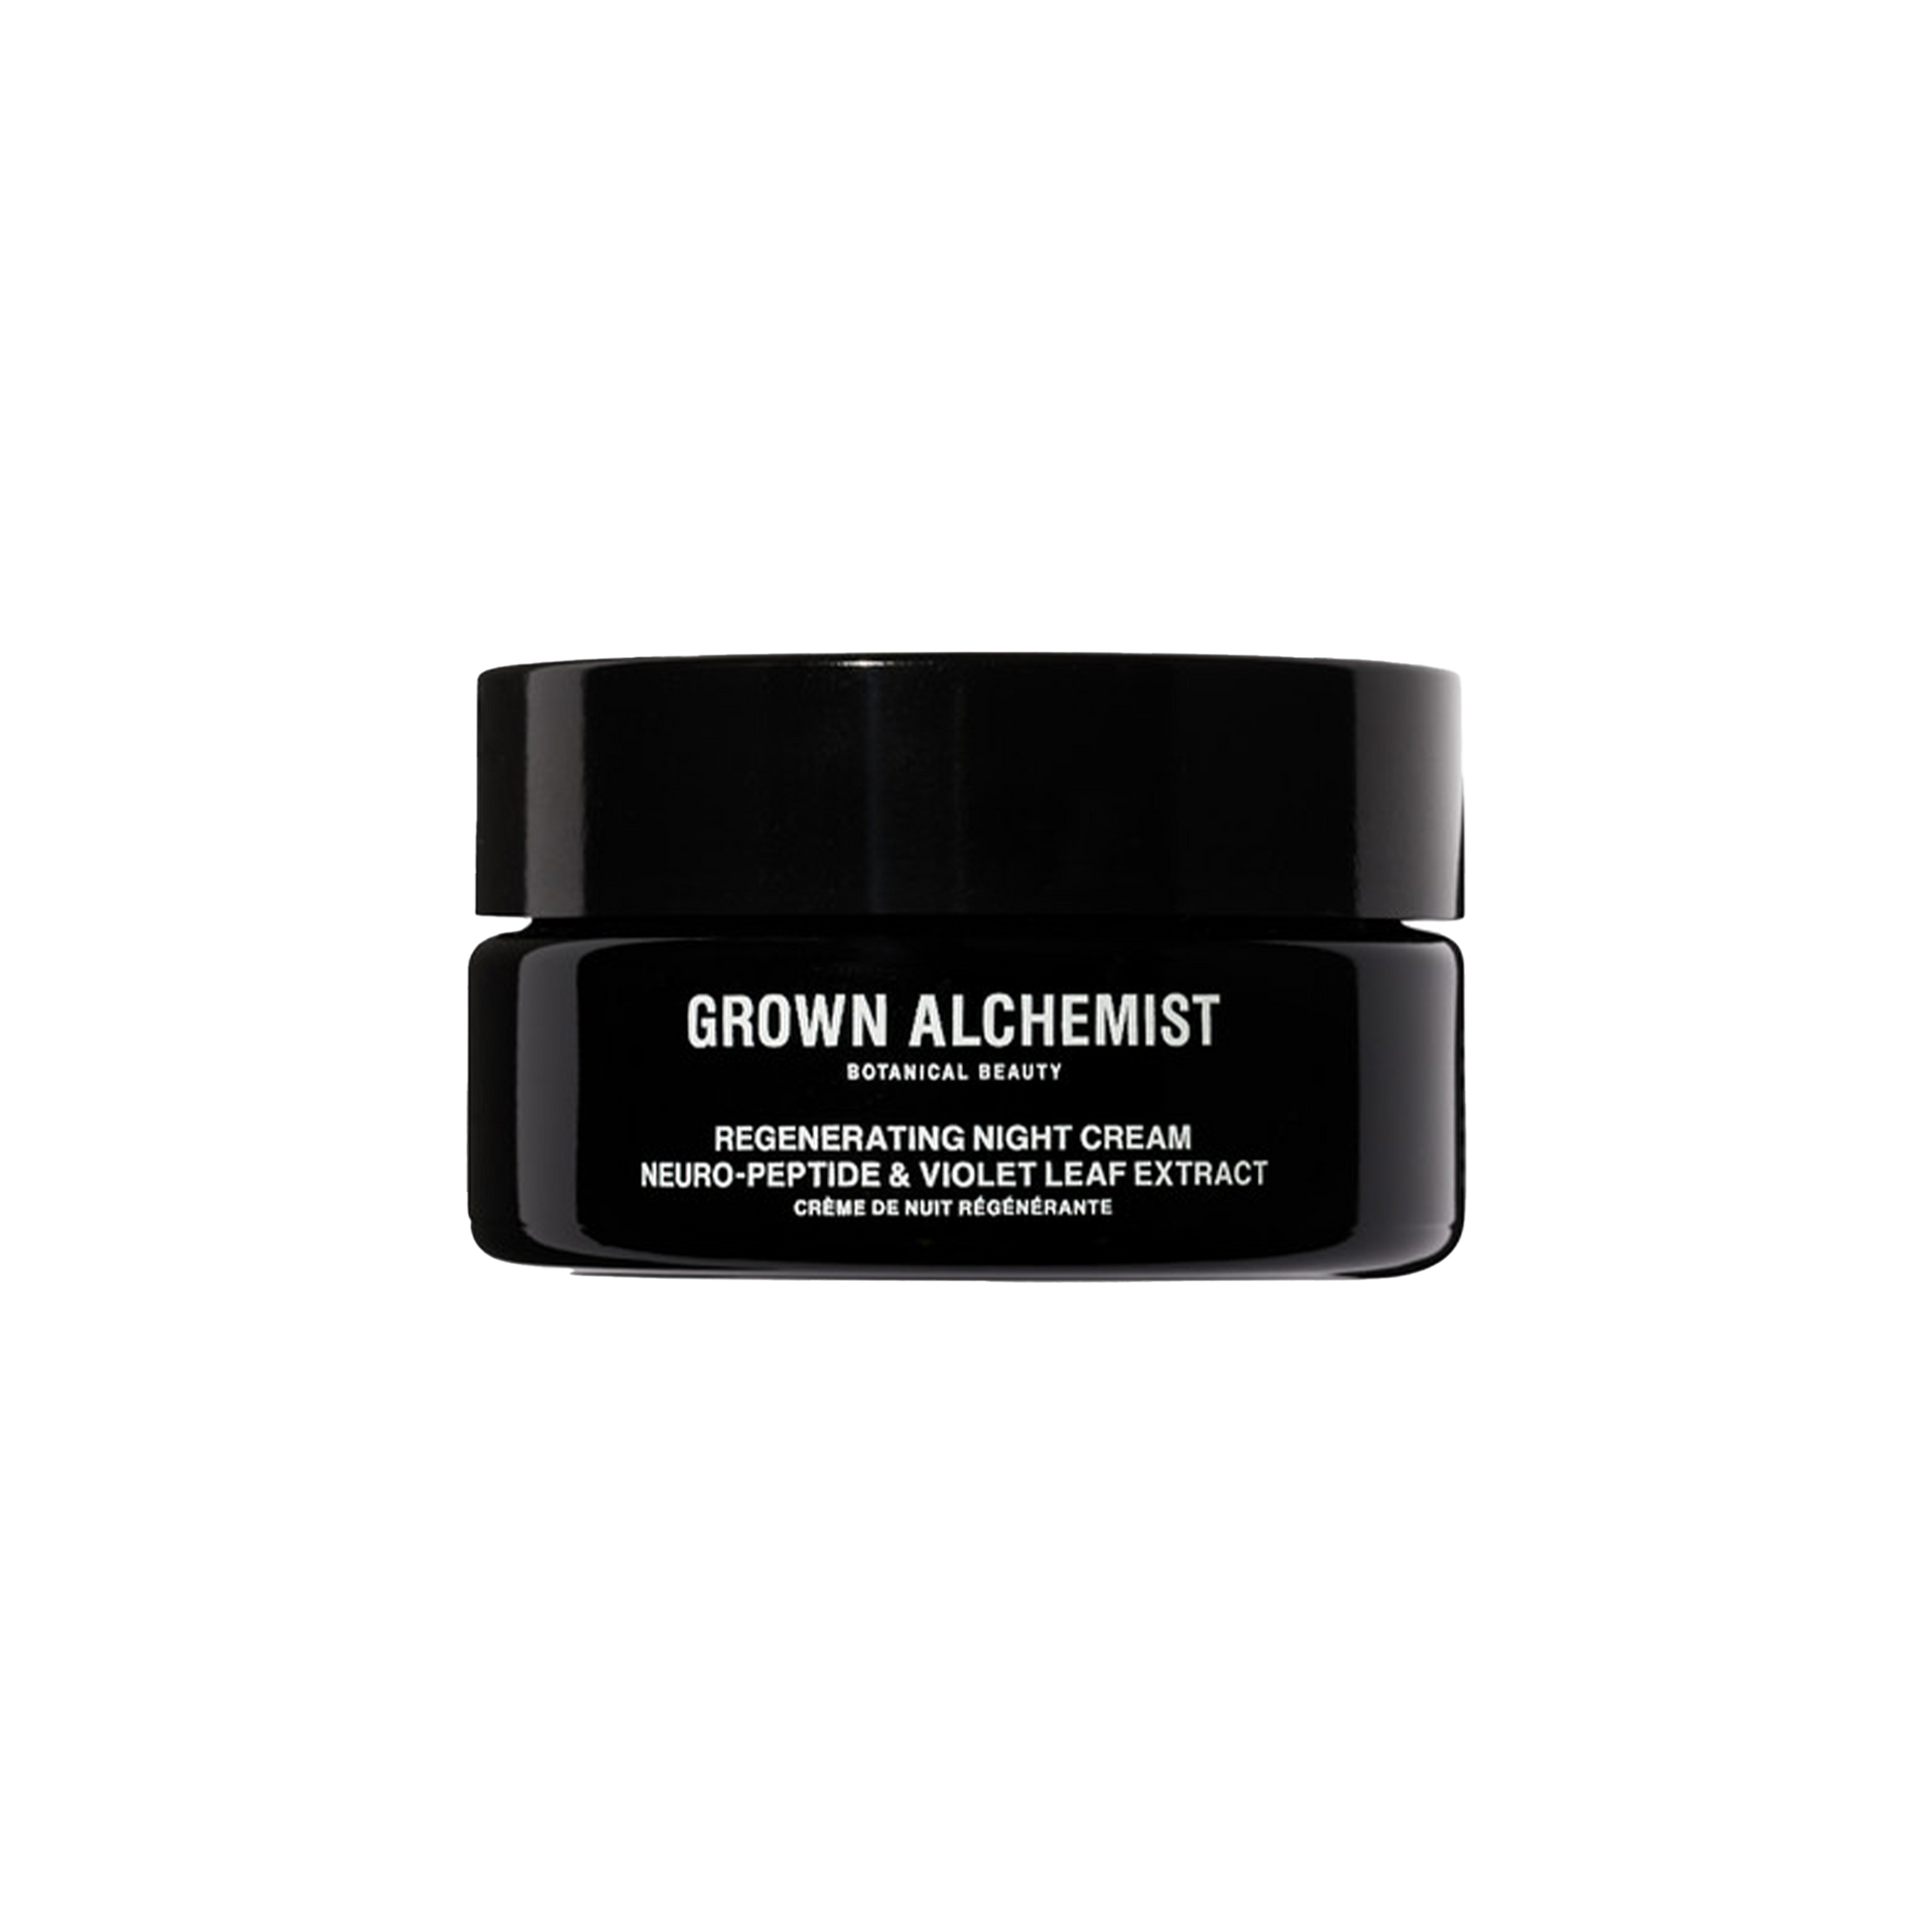 Grown Alchemist Regenerating Night Cream: A rich advanced facial cream formulated with a potent synergistic blend of Peptides, Antioxidants, Vitamins, Hyaluronic Acid, Essential Omega Fatty Acids that restore skin elasticity, noticeably reducing the appearance of fine lines and wrinkles, softening and smoothing the skin while boosting hydration, transforming skin texture to appear more youthful looking.